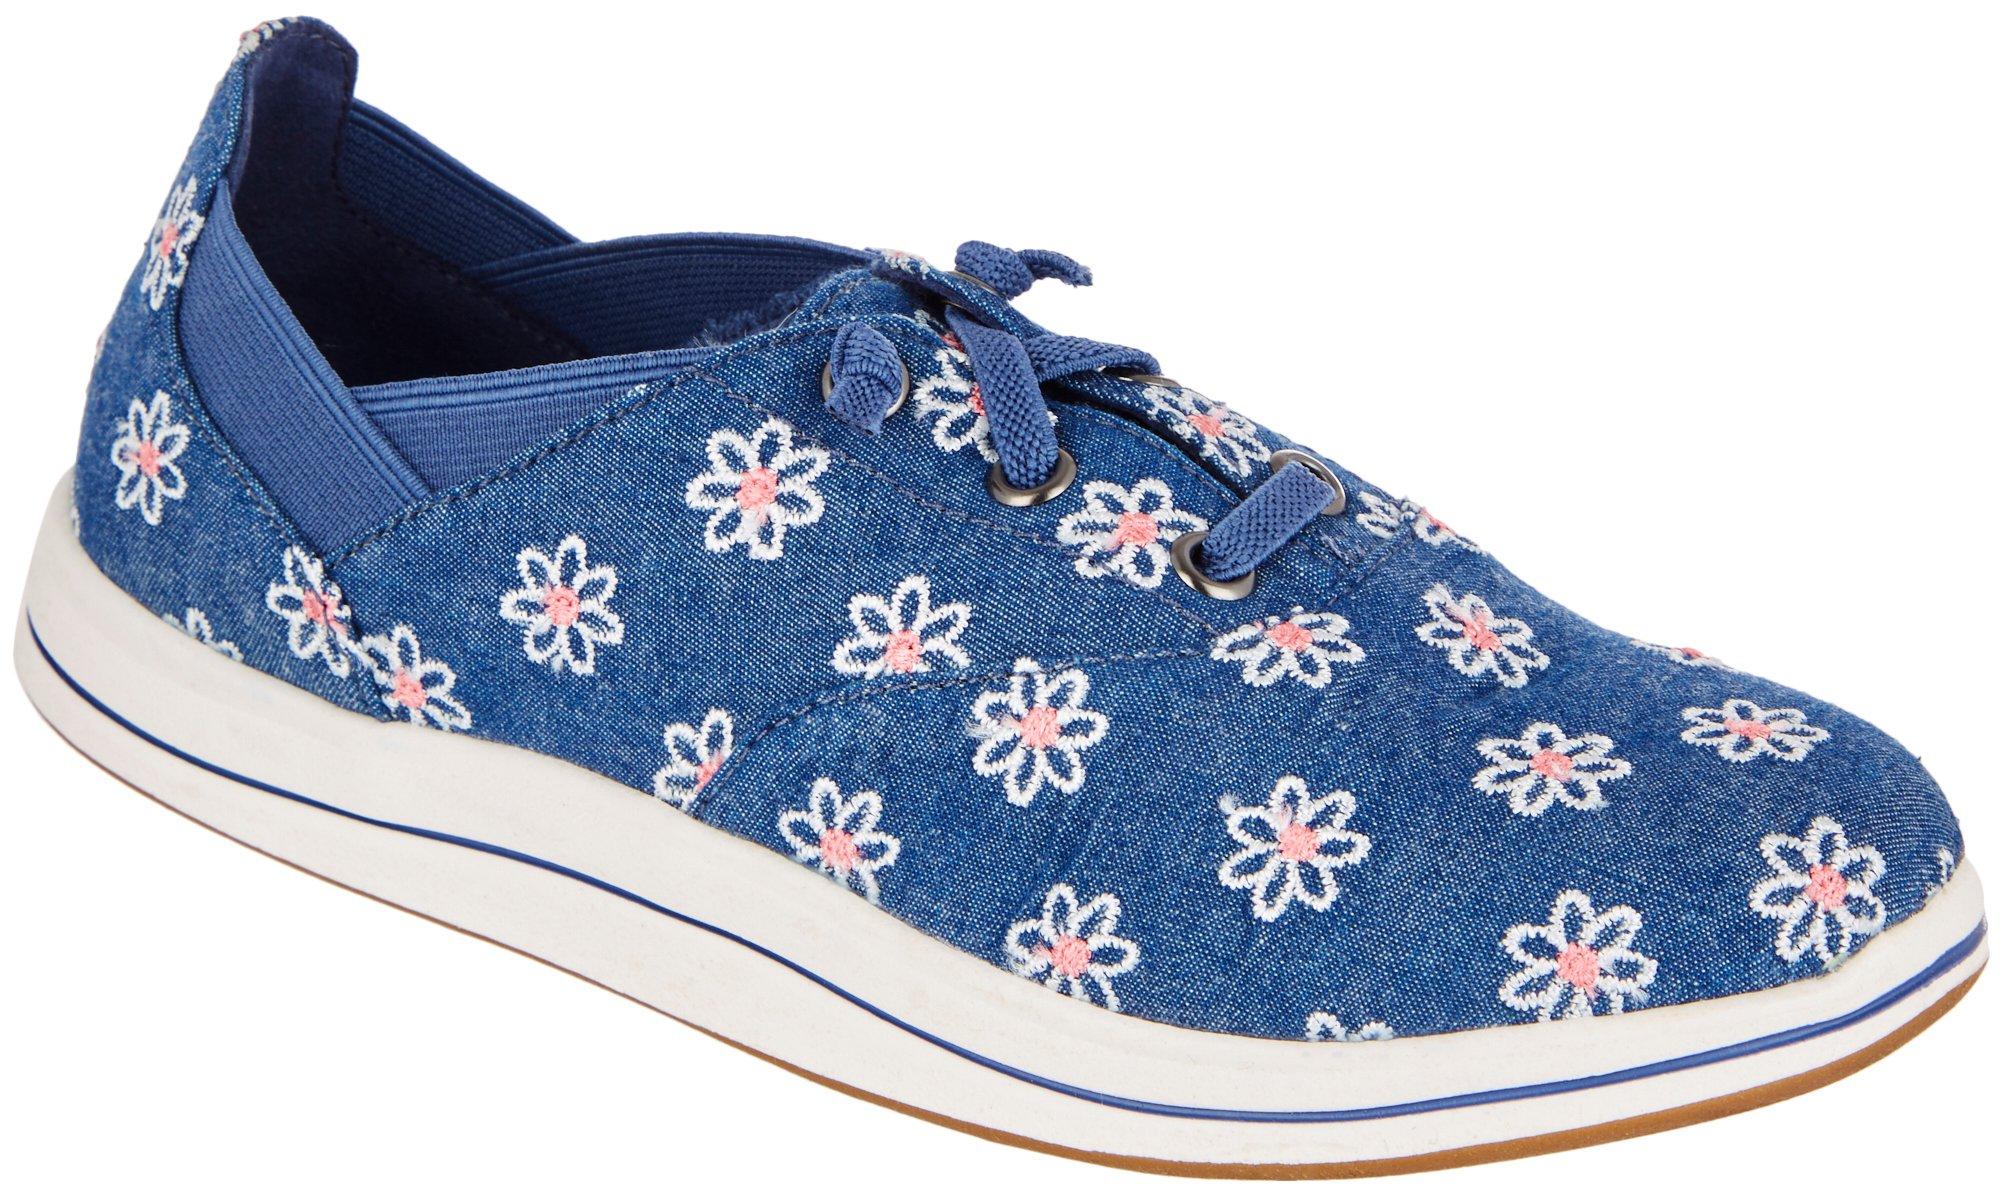 Women's Embroidered Floral Canvas Sneakers